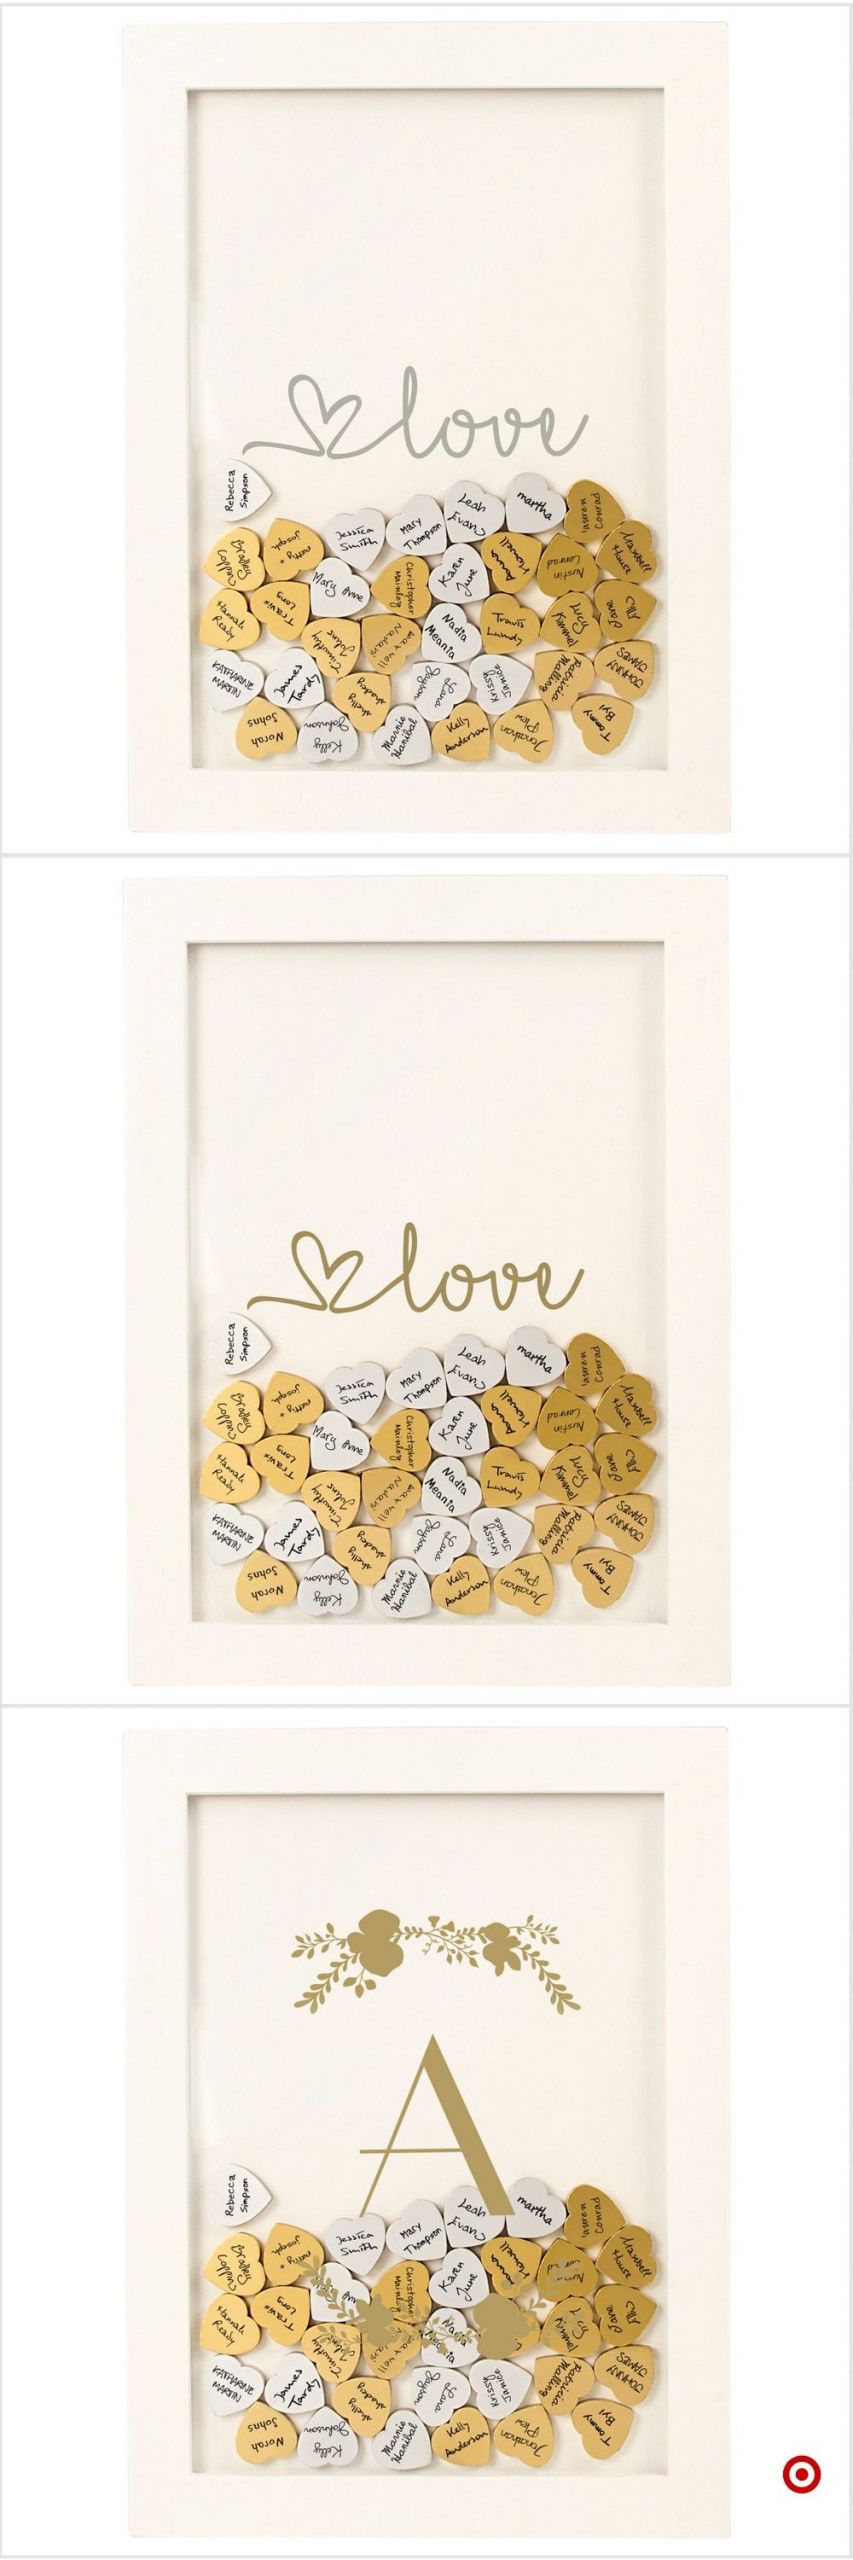 Target Wedding Guest Book
 Shop Tar for guest book you will love at great low